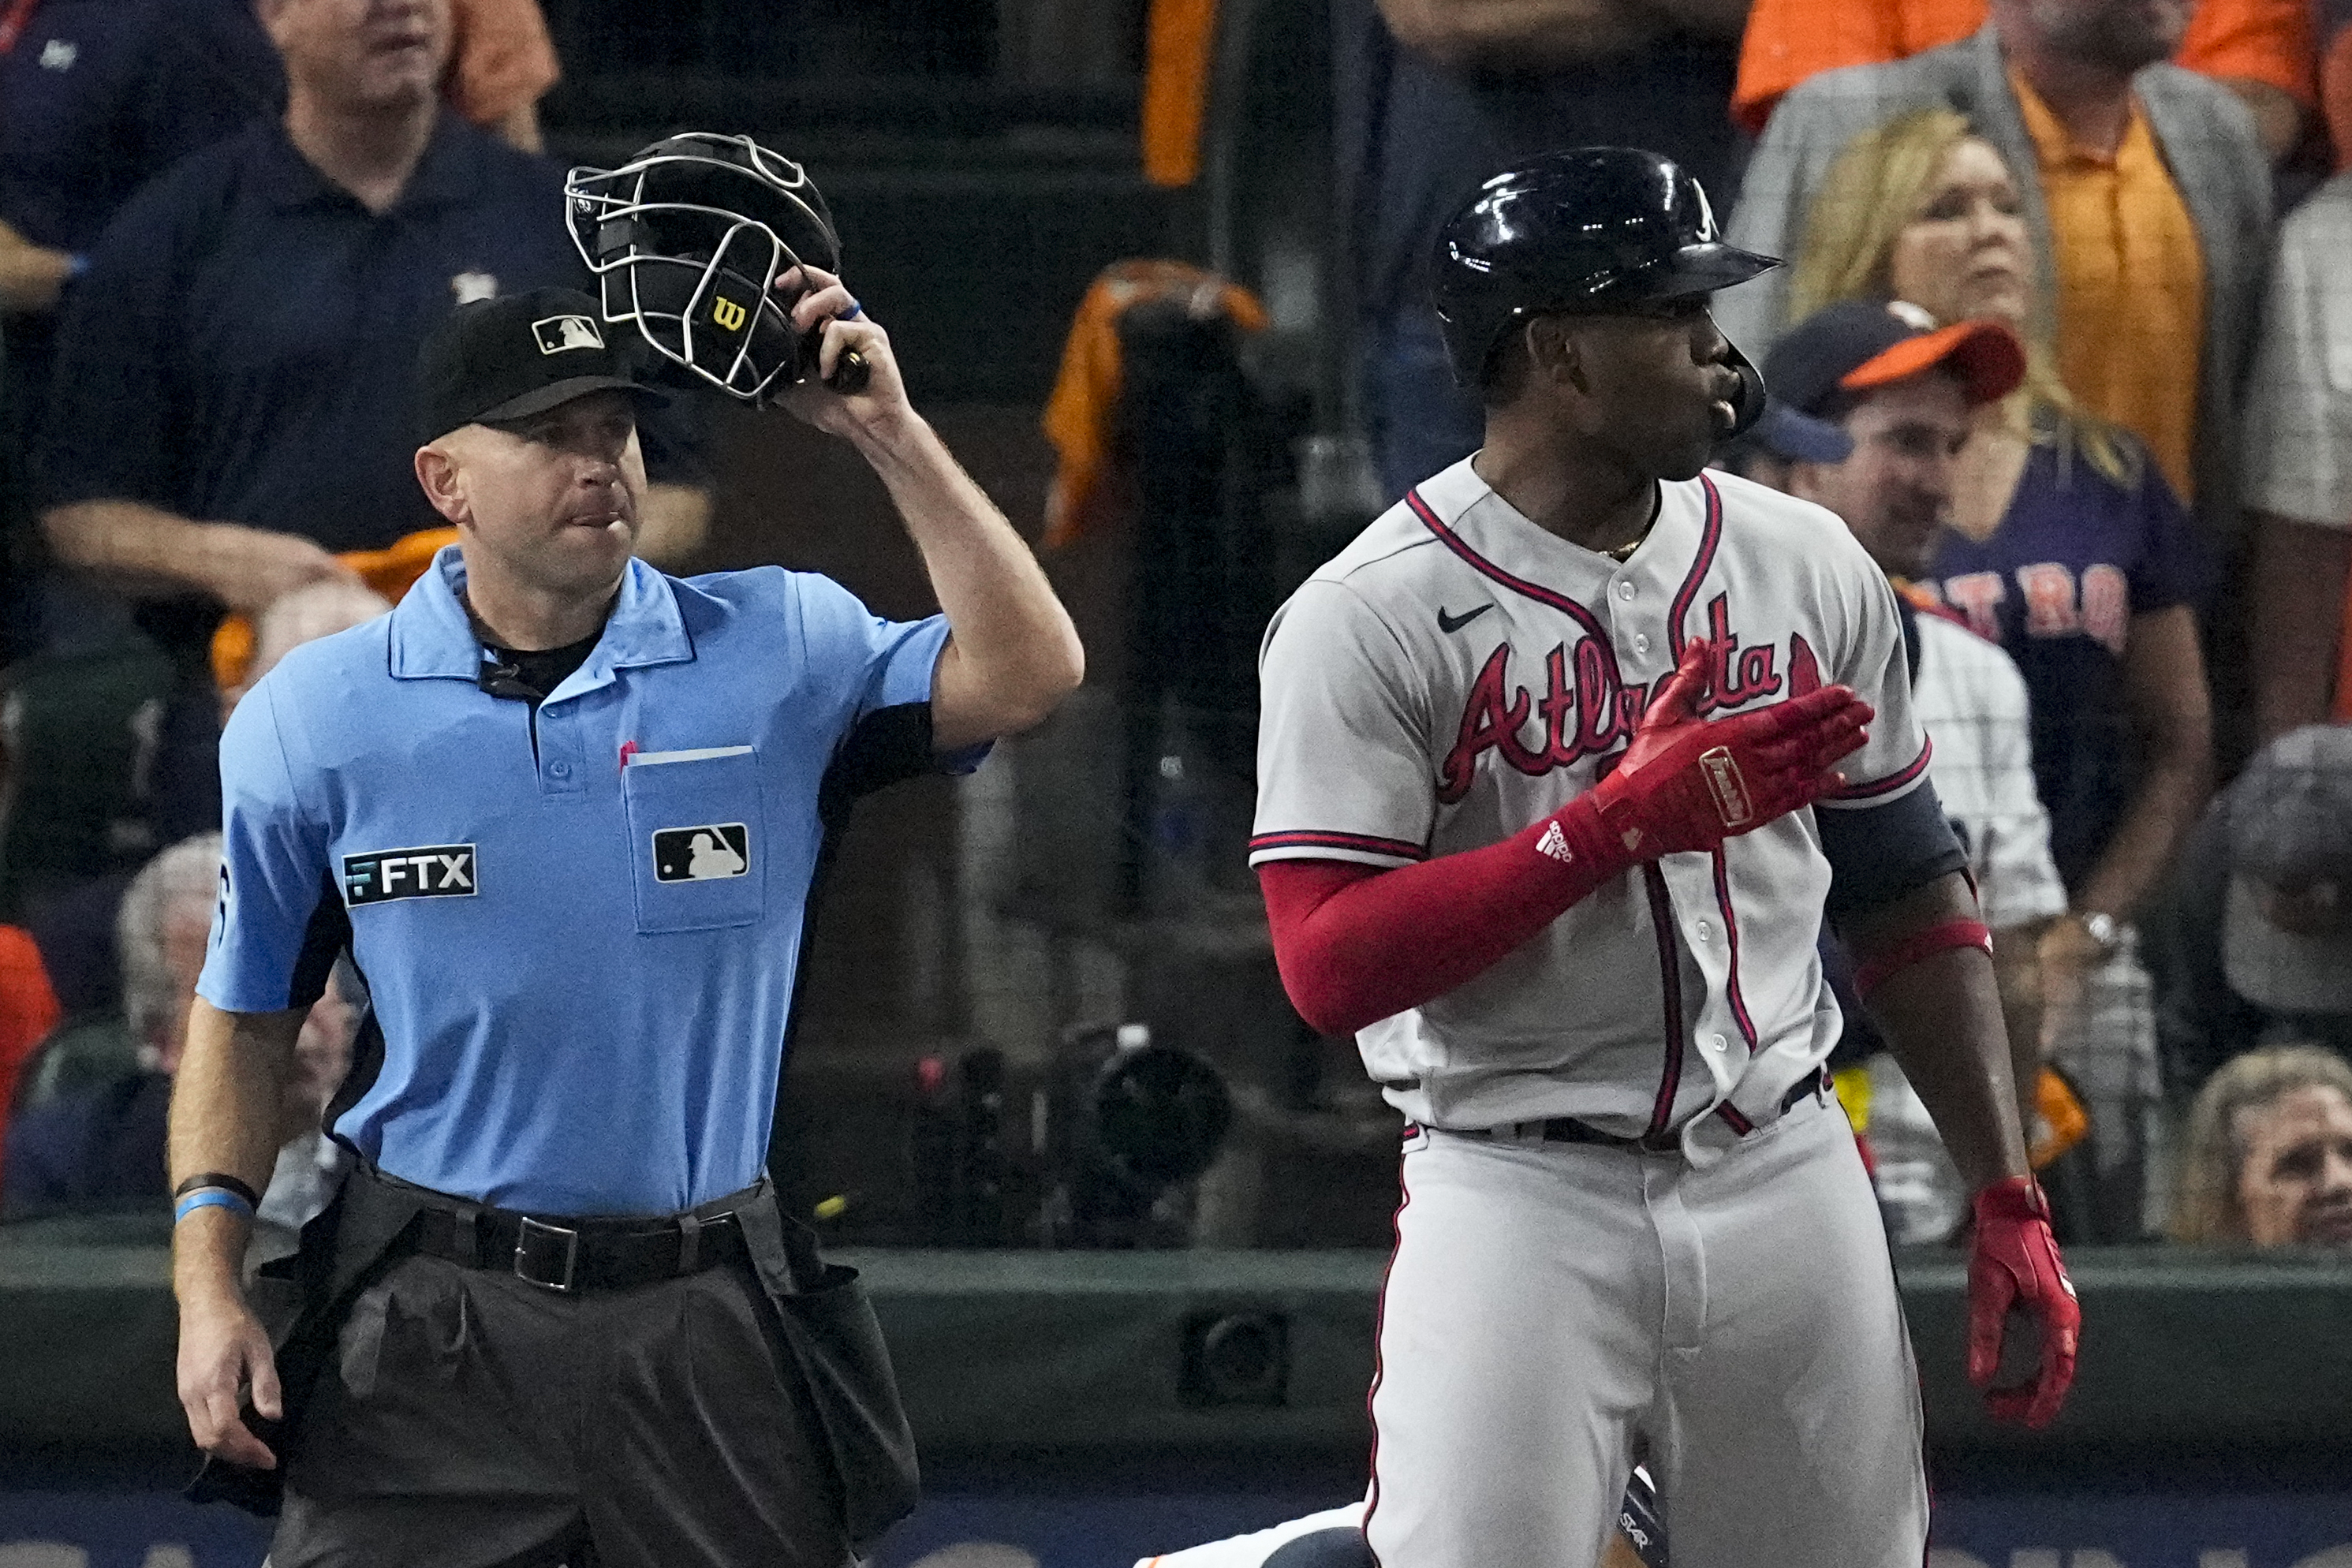 Braves rout Astros, win first World Series title since 1995